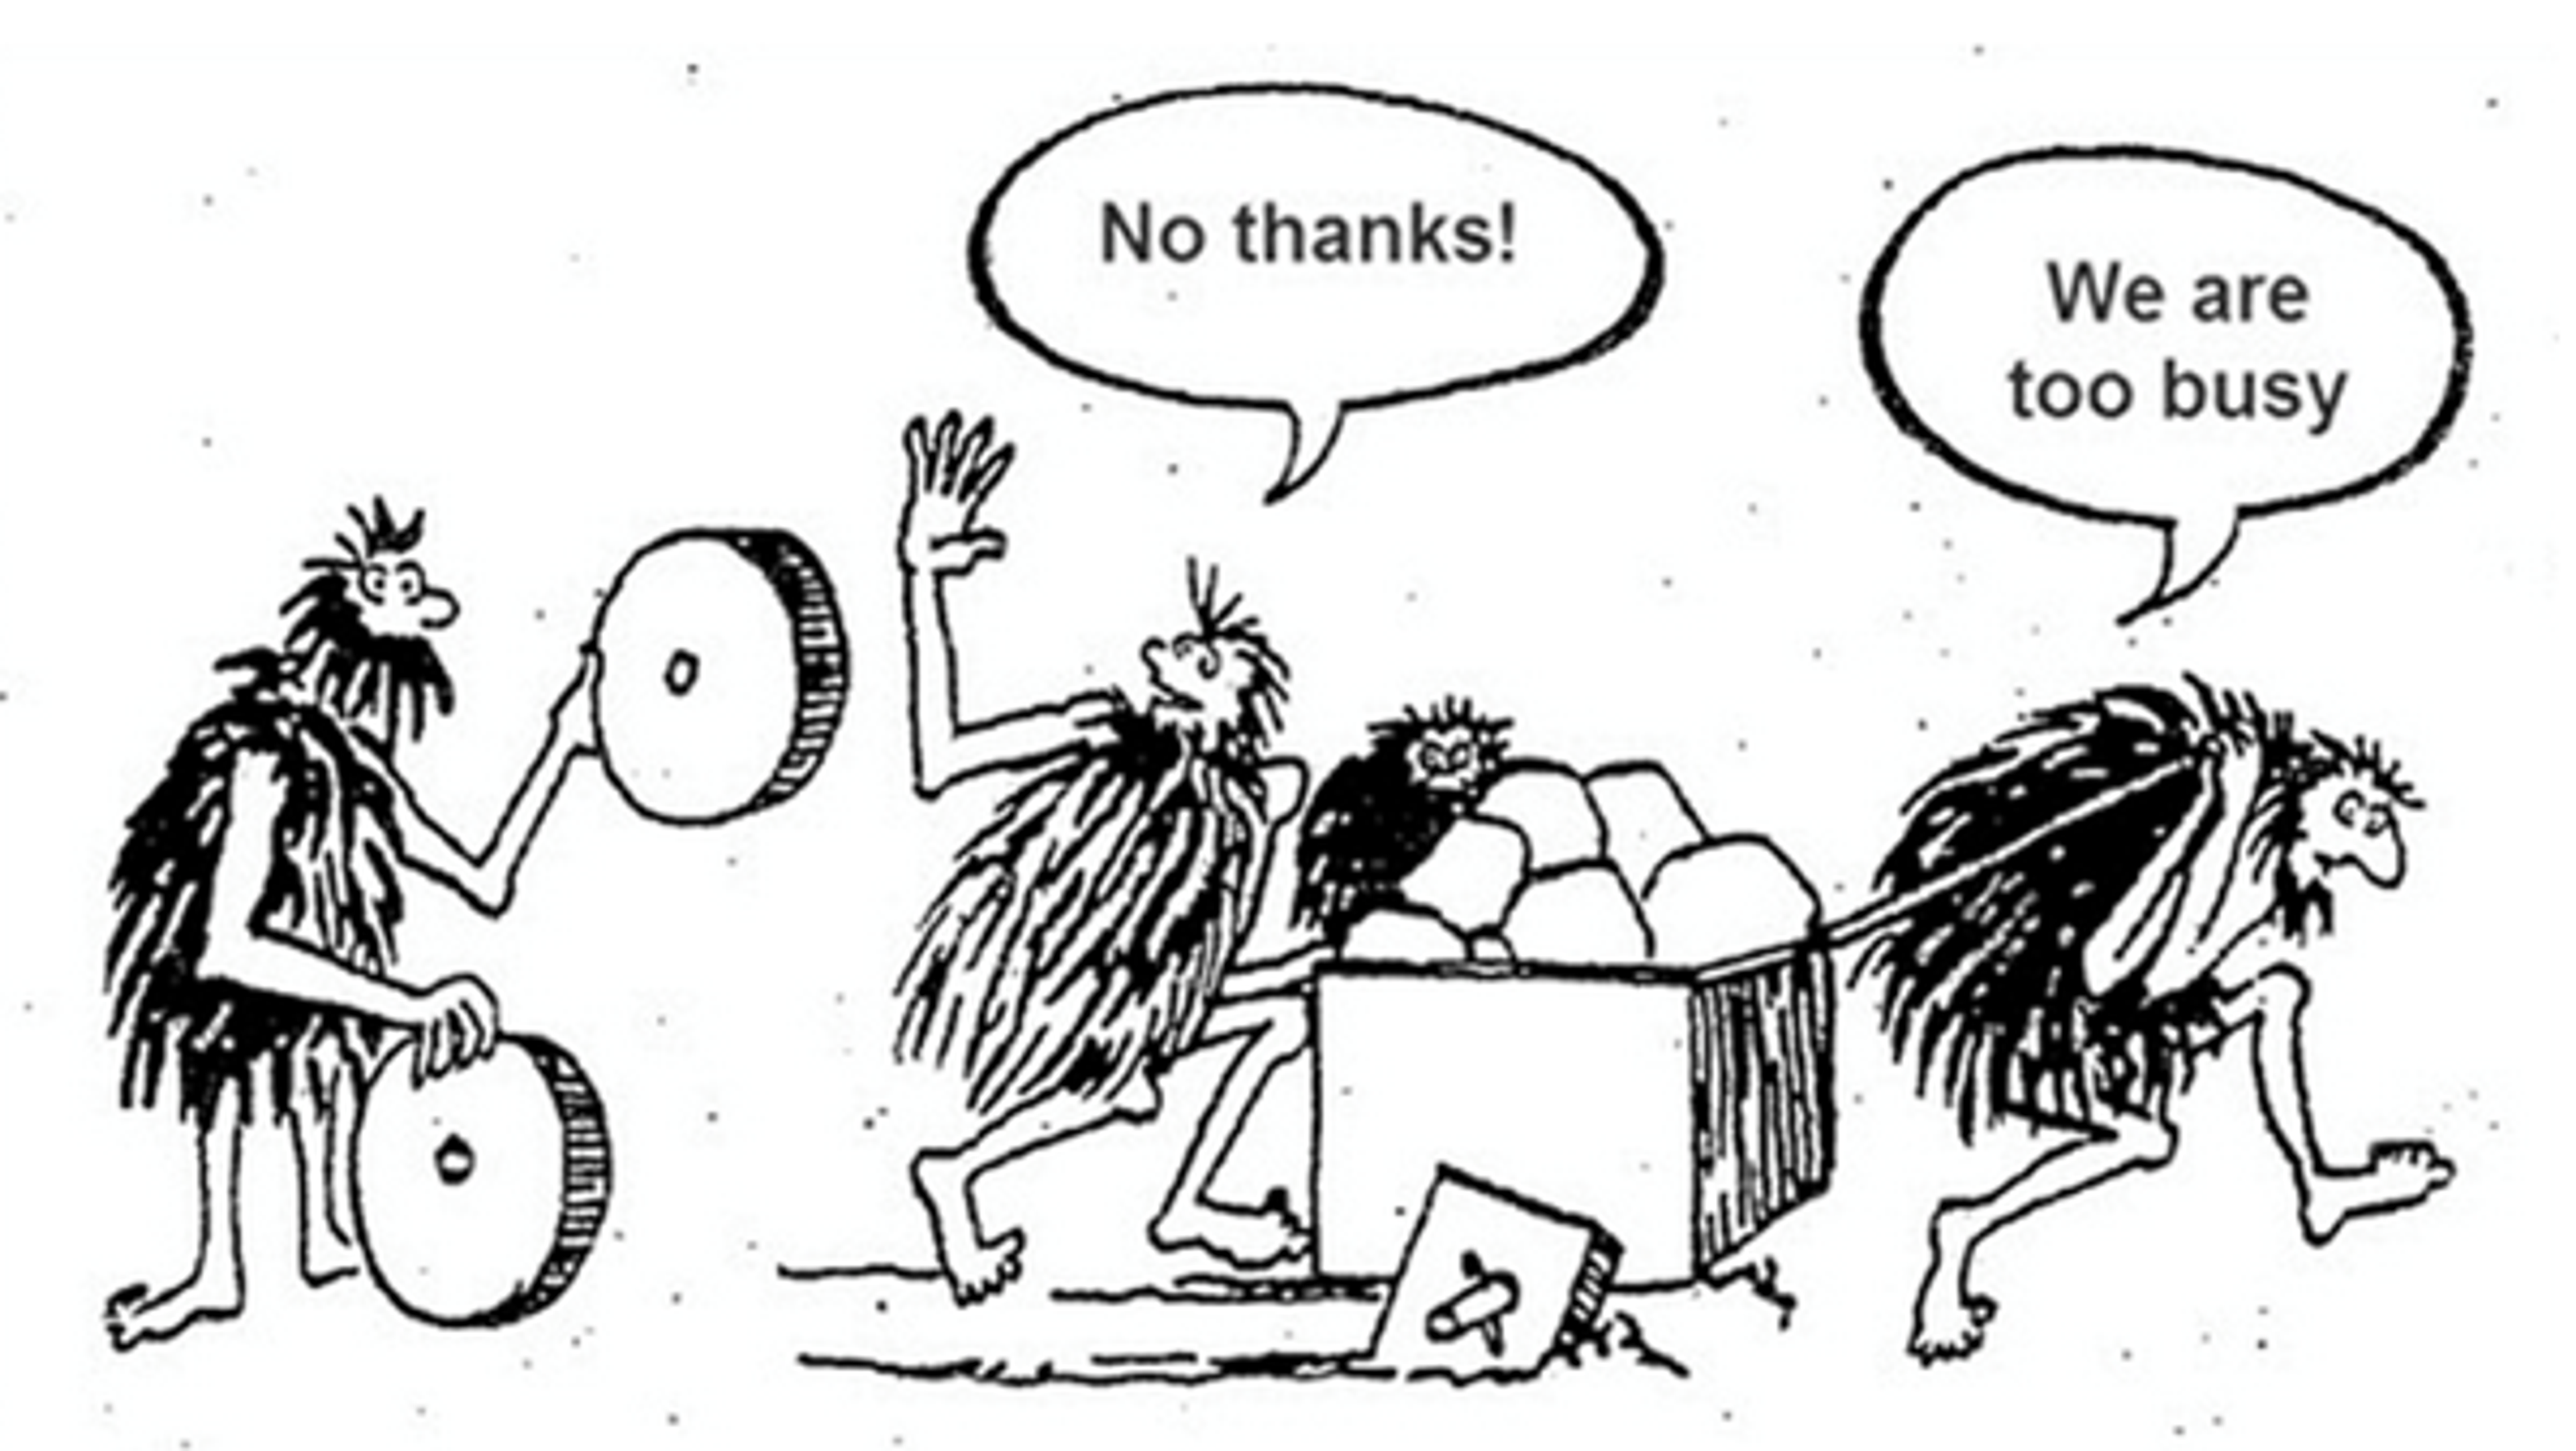 Cartoon drawing with one person offering 2 round wheels to 2 people pulling a cart with square wheels. The first person waves them off saying "no thanks". The other person says "we are too busy".